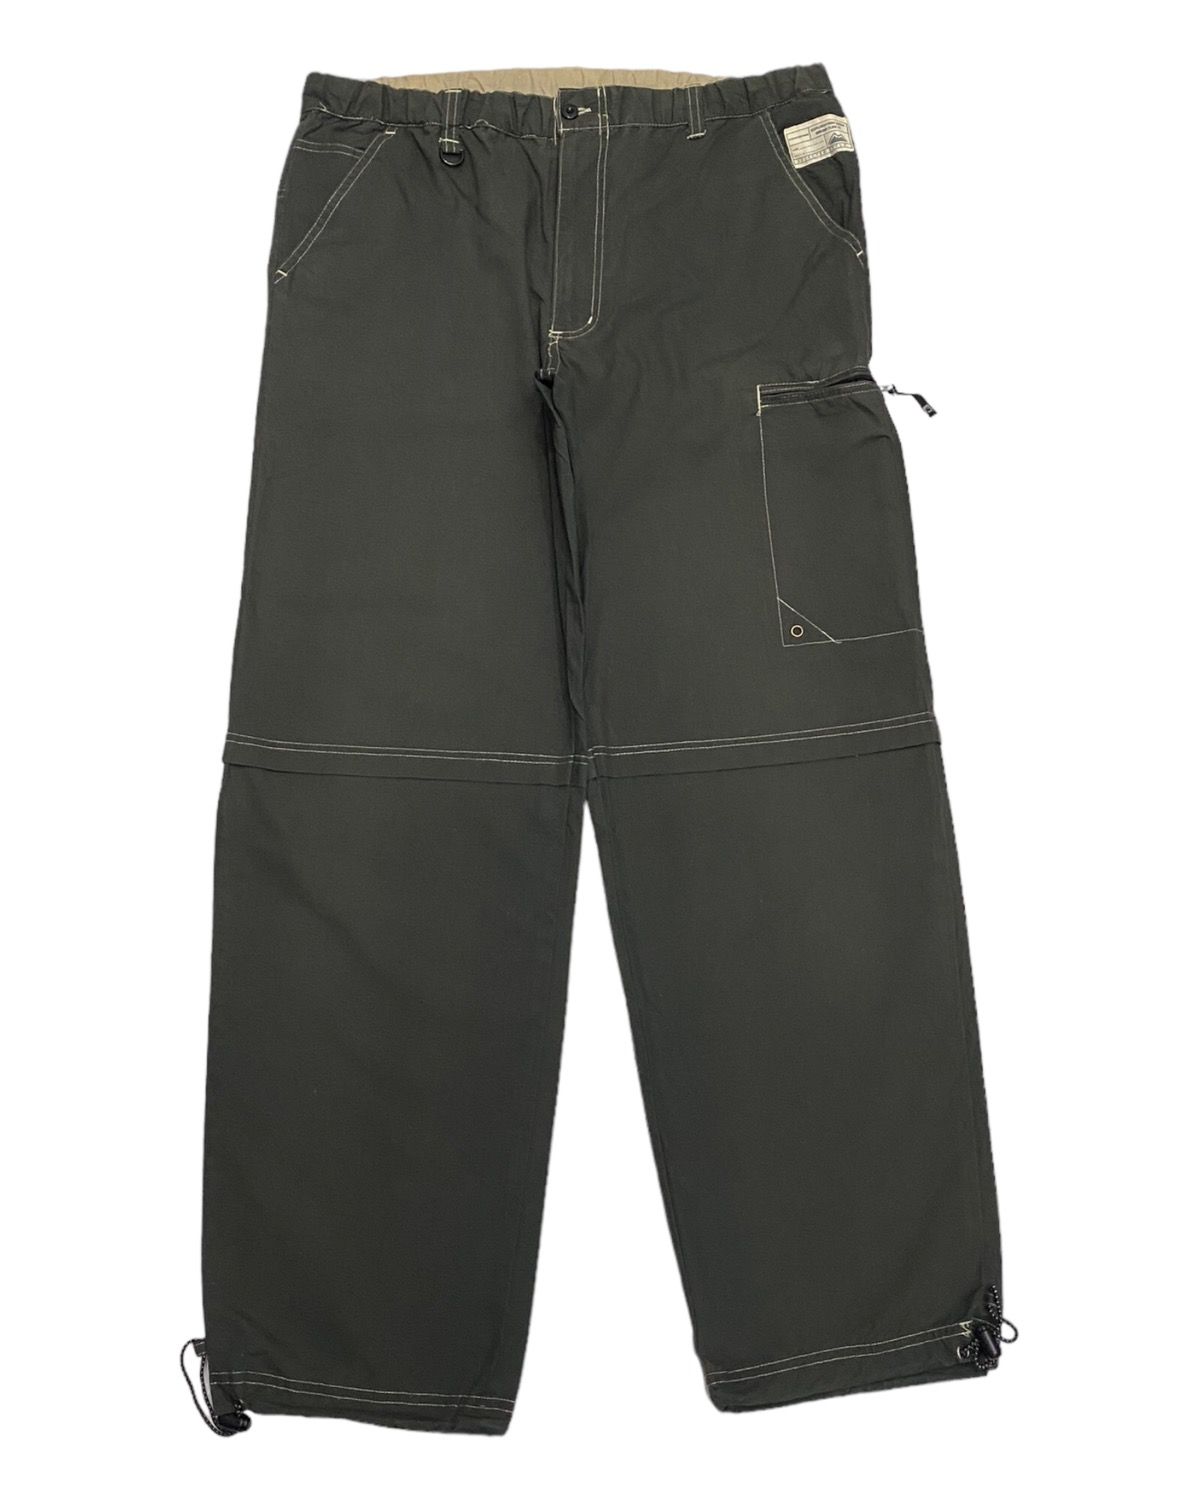 Outdoor Style Go Out! - 🇯🇵FIRST DOWN JAPAN BAGGY OUTDOOR HIP HOP CASUAL PANTS - 1